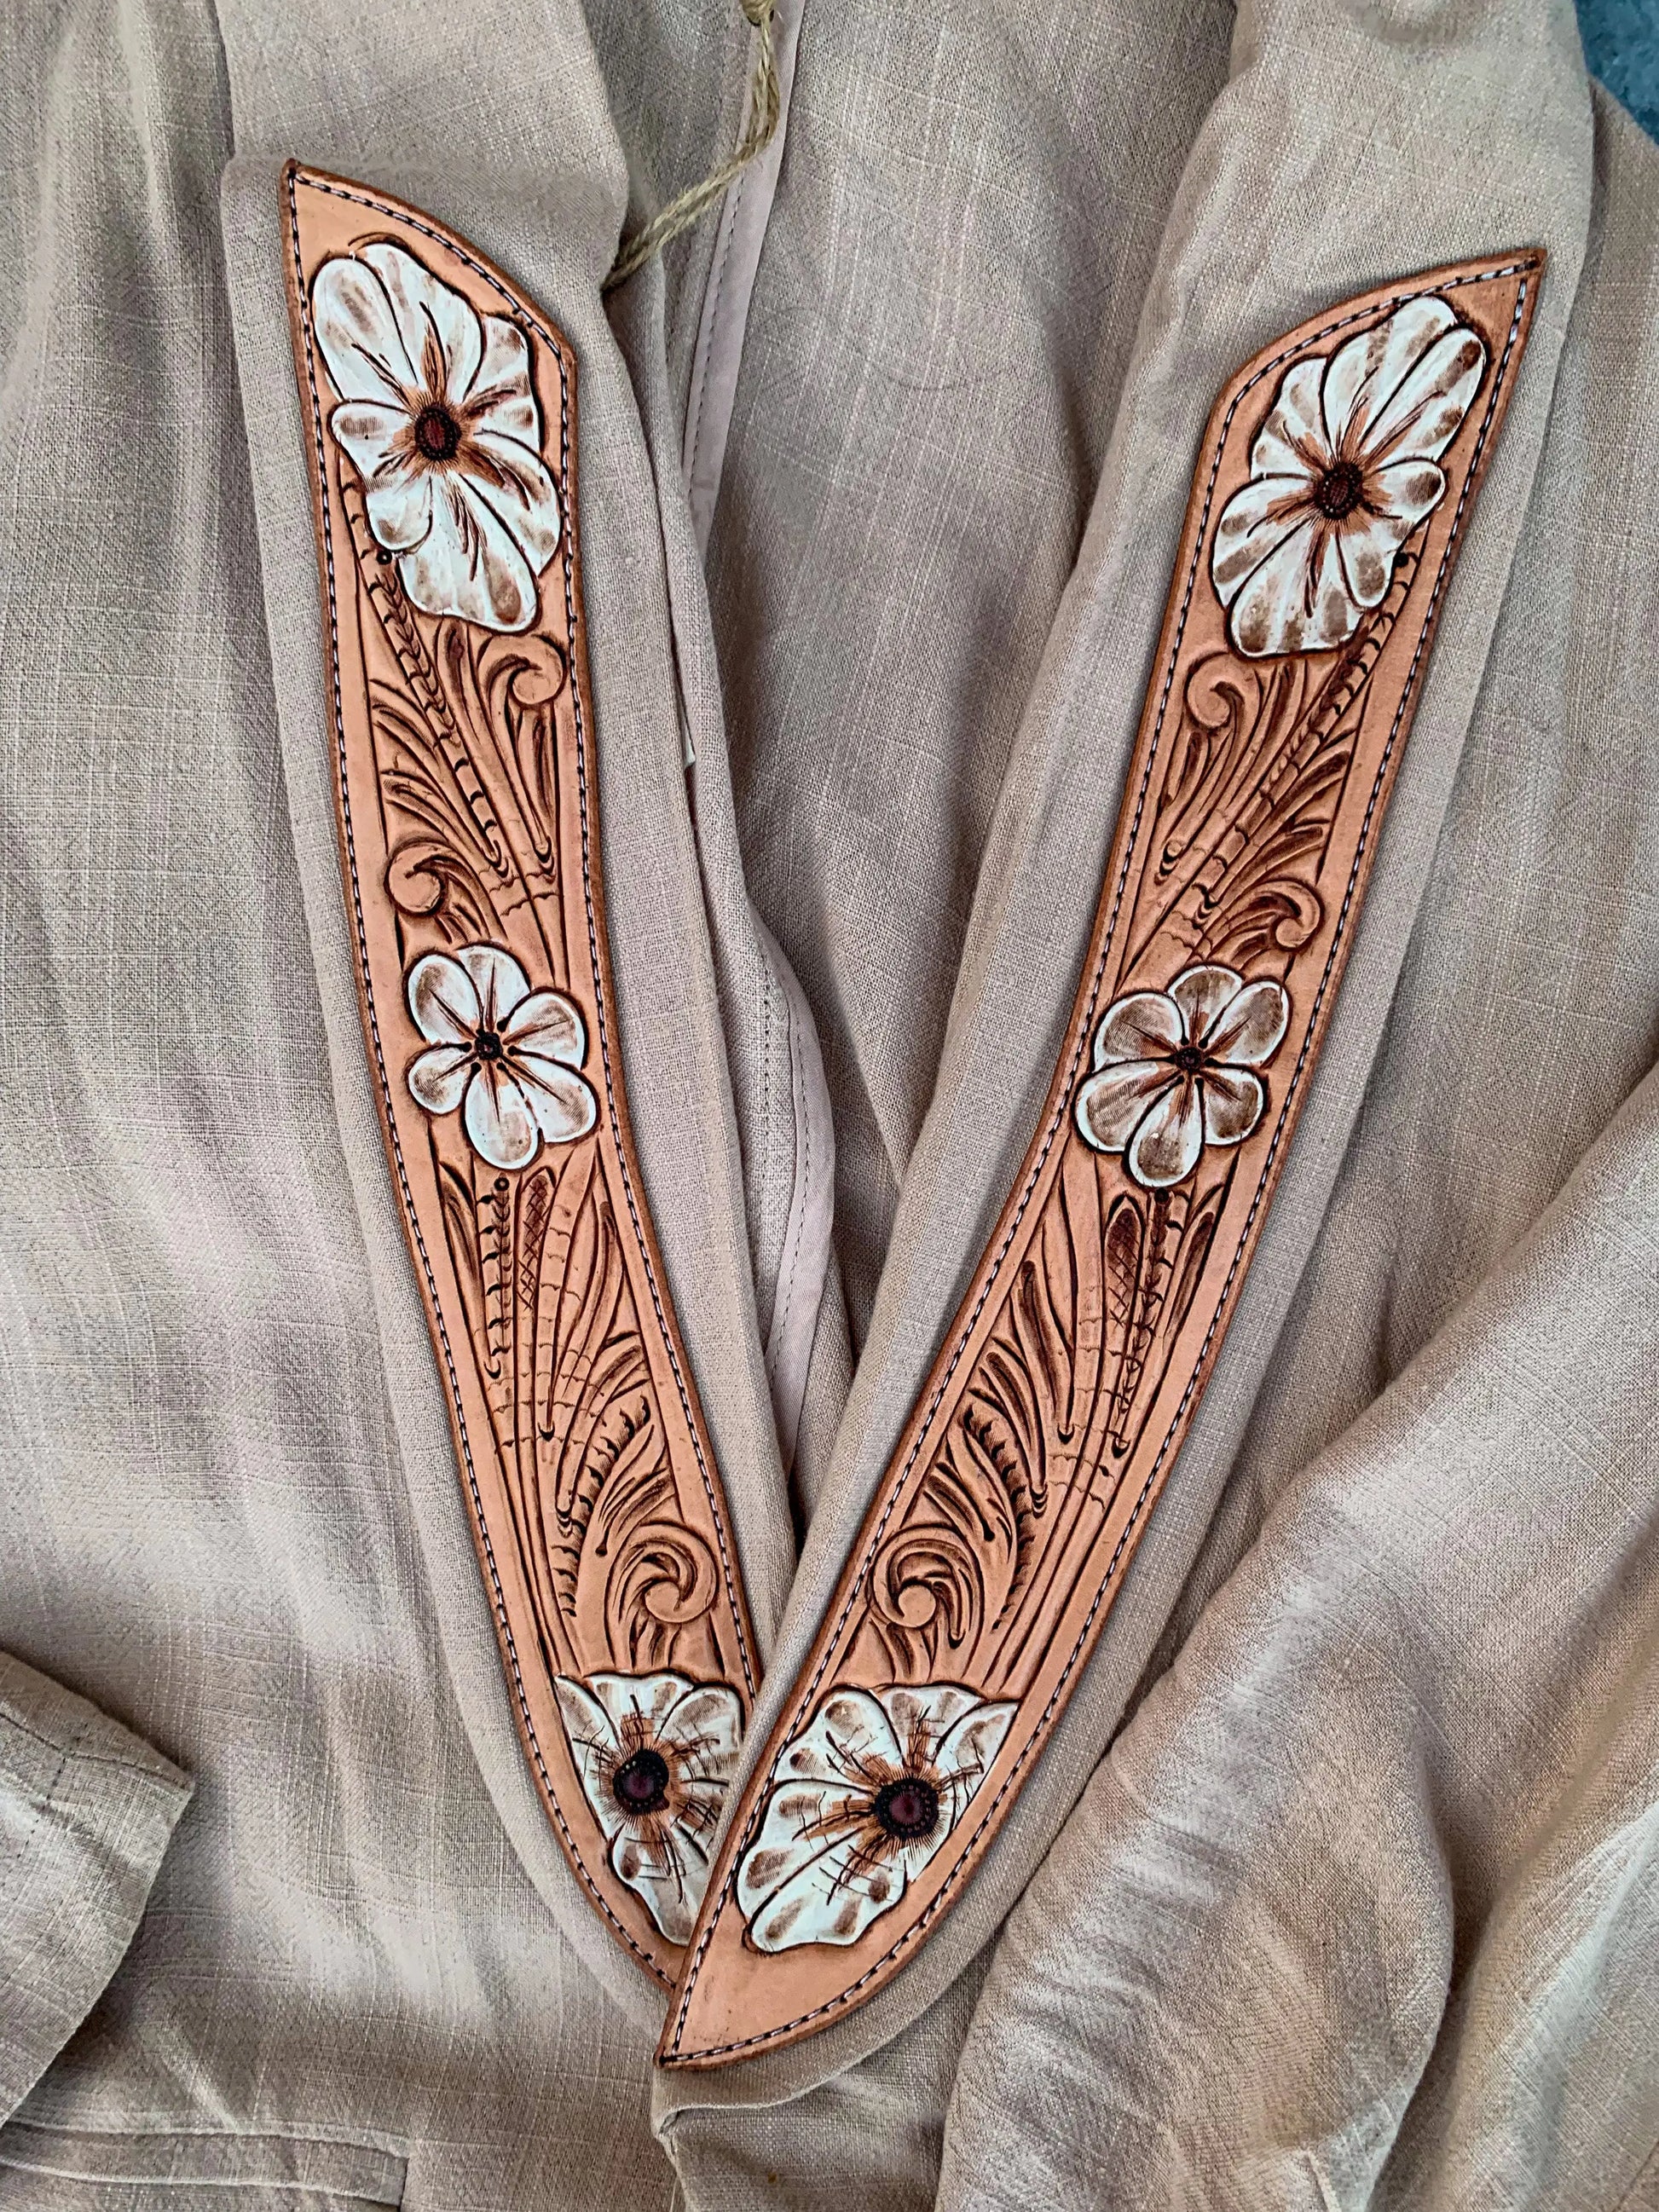 Summertime Linen Hand Tooled Leather Blazer in Natural Tan The Rodeo Rose